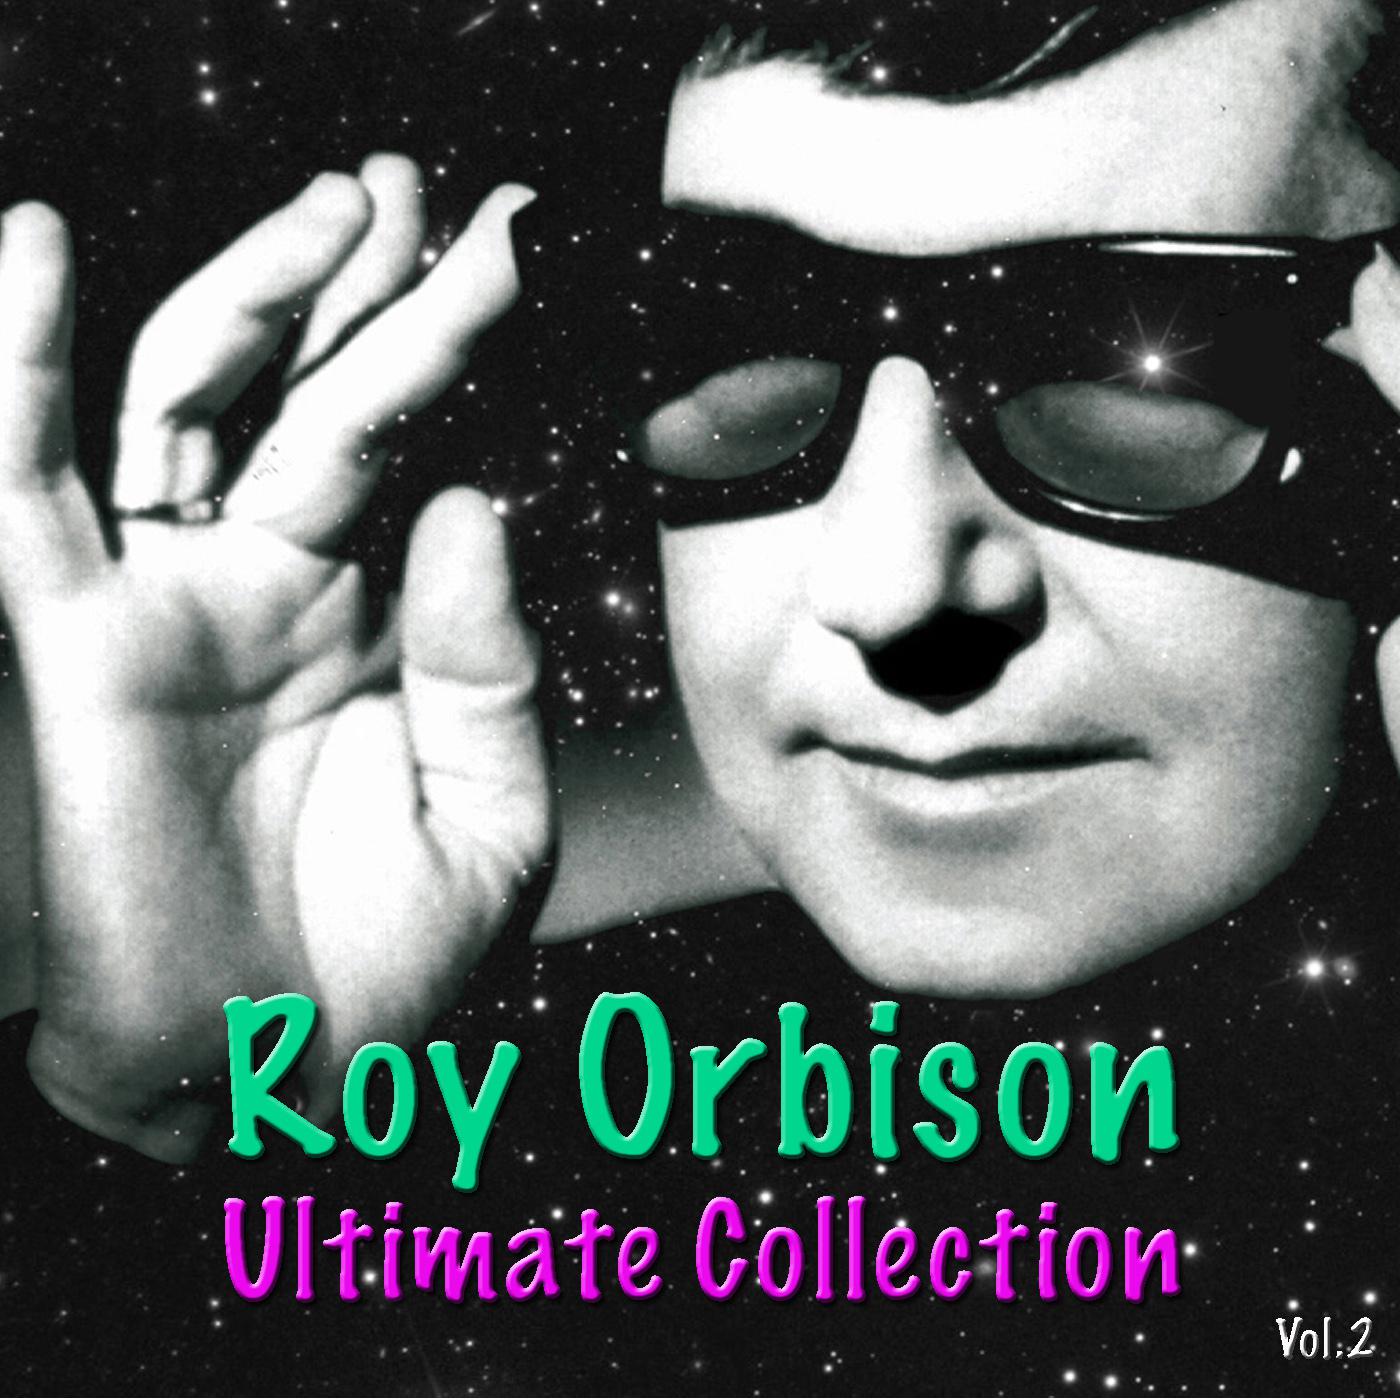 Roy Orbison, Ultimate Collection Vol. 2